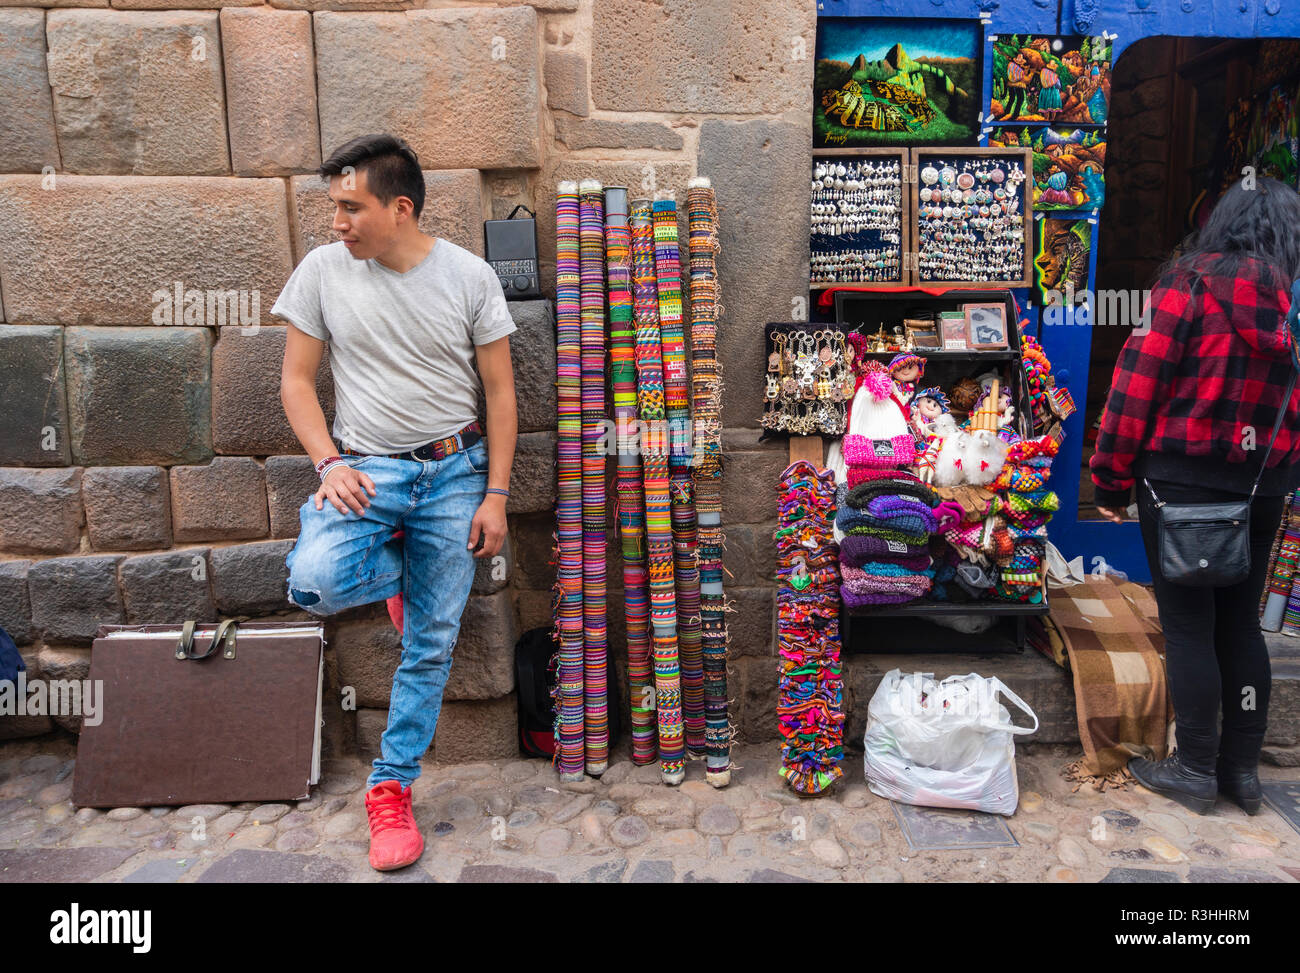 Man selling handcrafts in an alley in Cusco, Peru Stock Photo